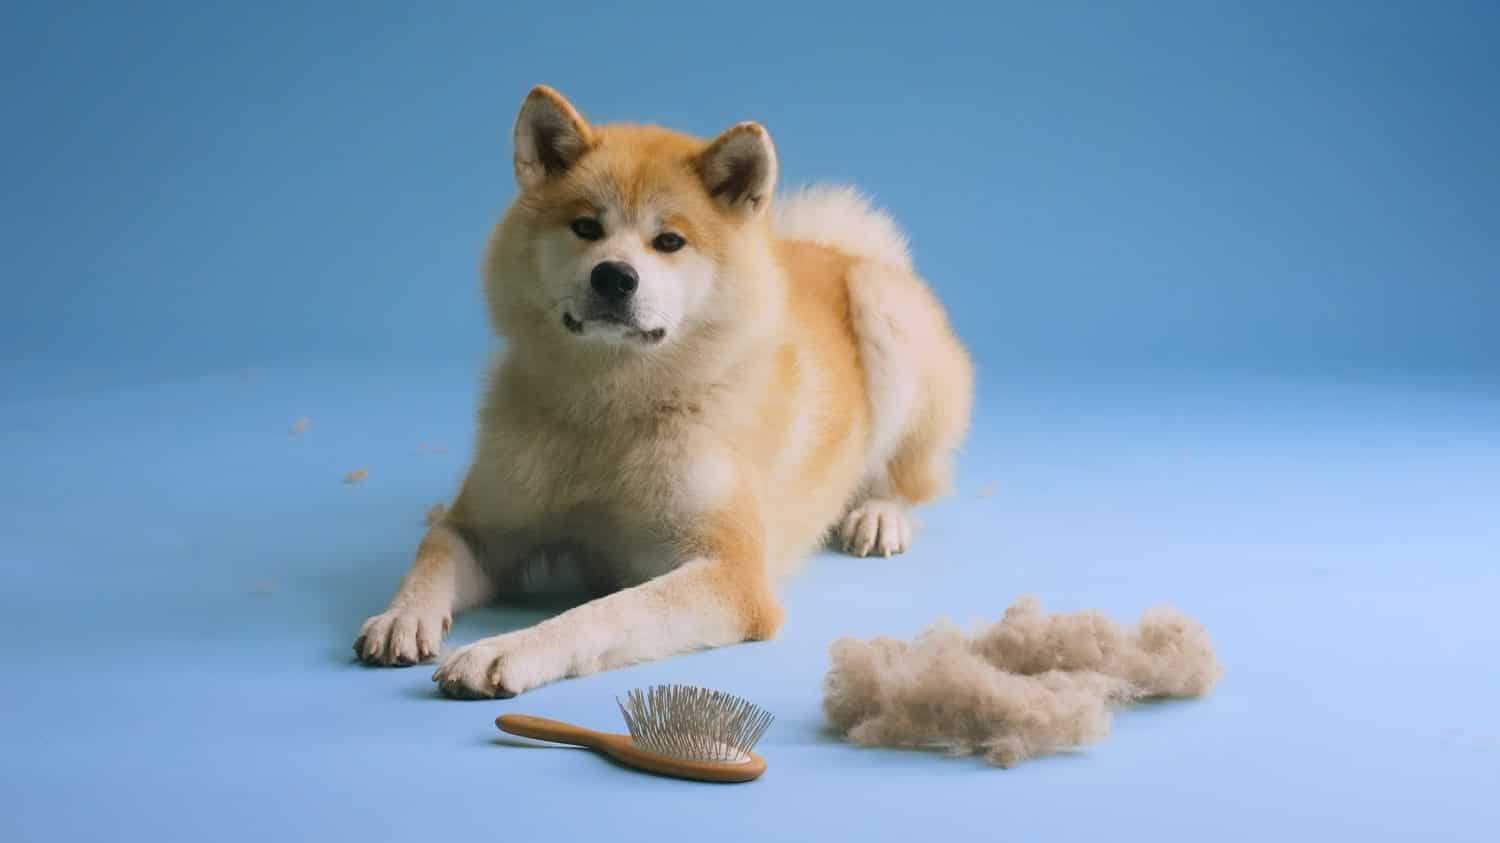 Japanese Akita Inu puppy posing with brush and excess fur in front, looking at the camera after being groomed on a blue studio background